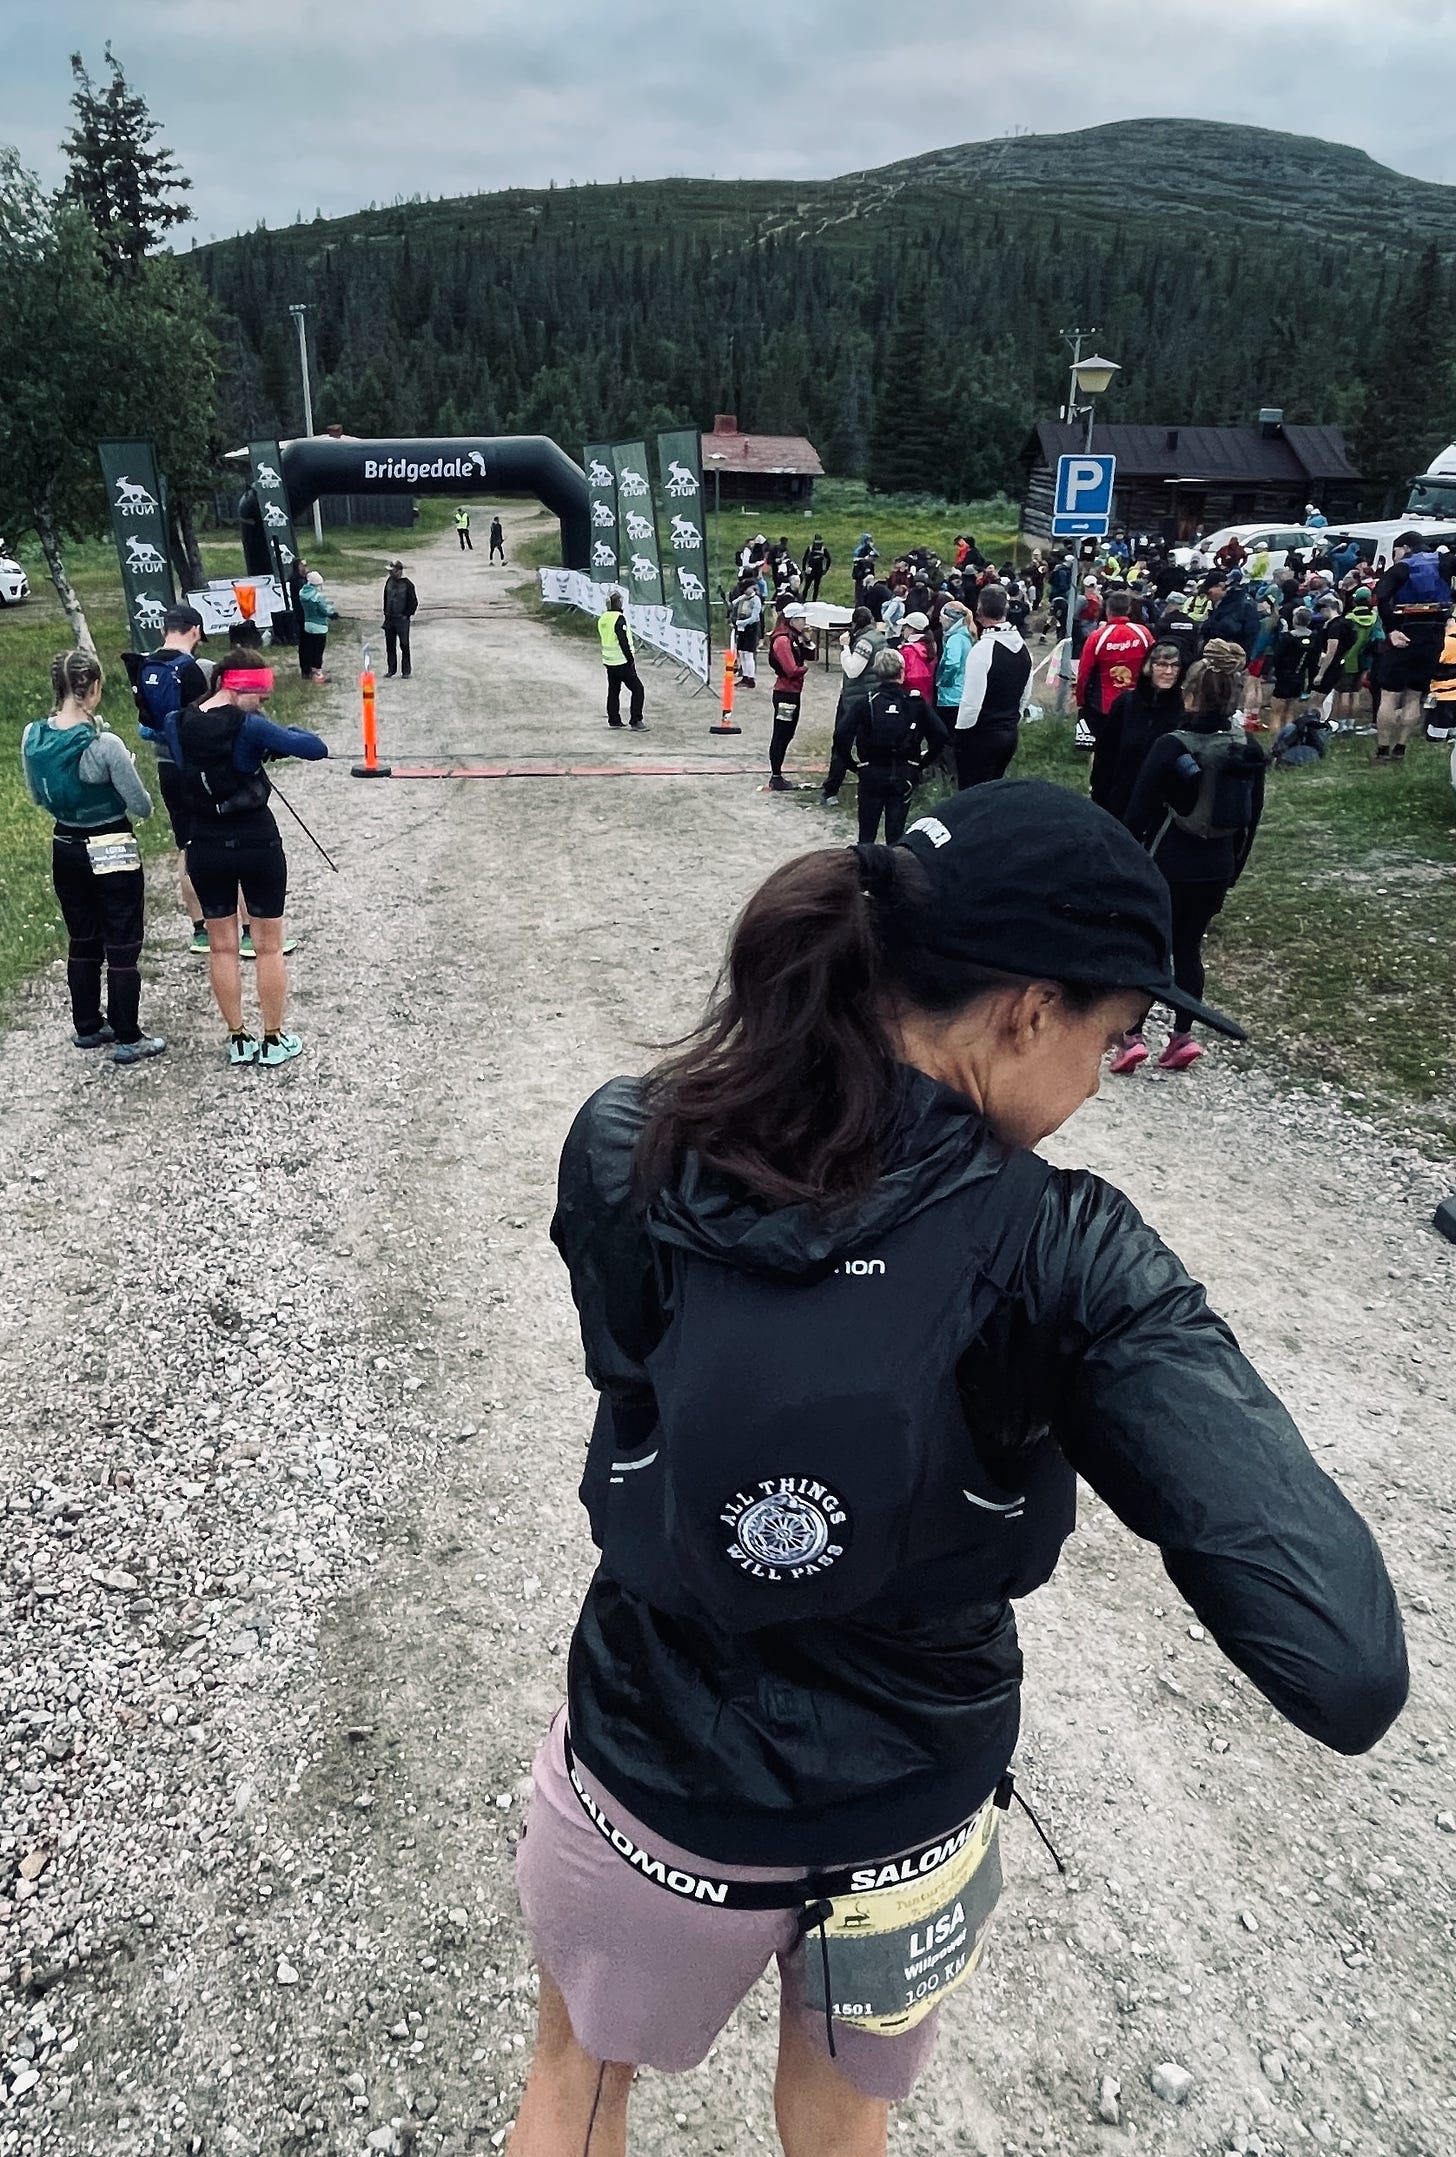 Lisa at the start line of Nuts Pallas 100 km race in Finland